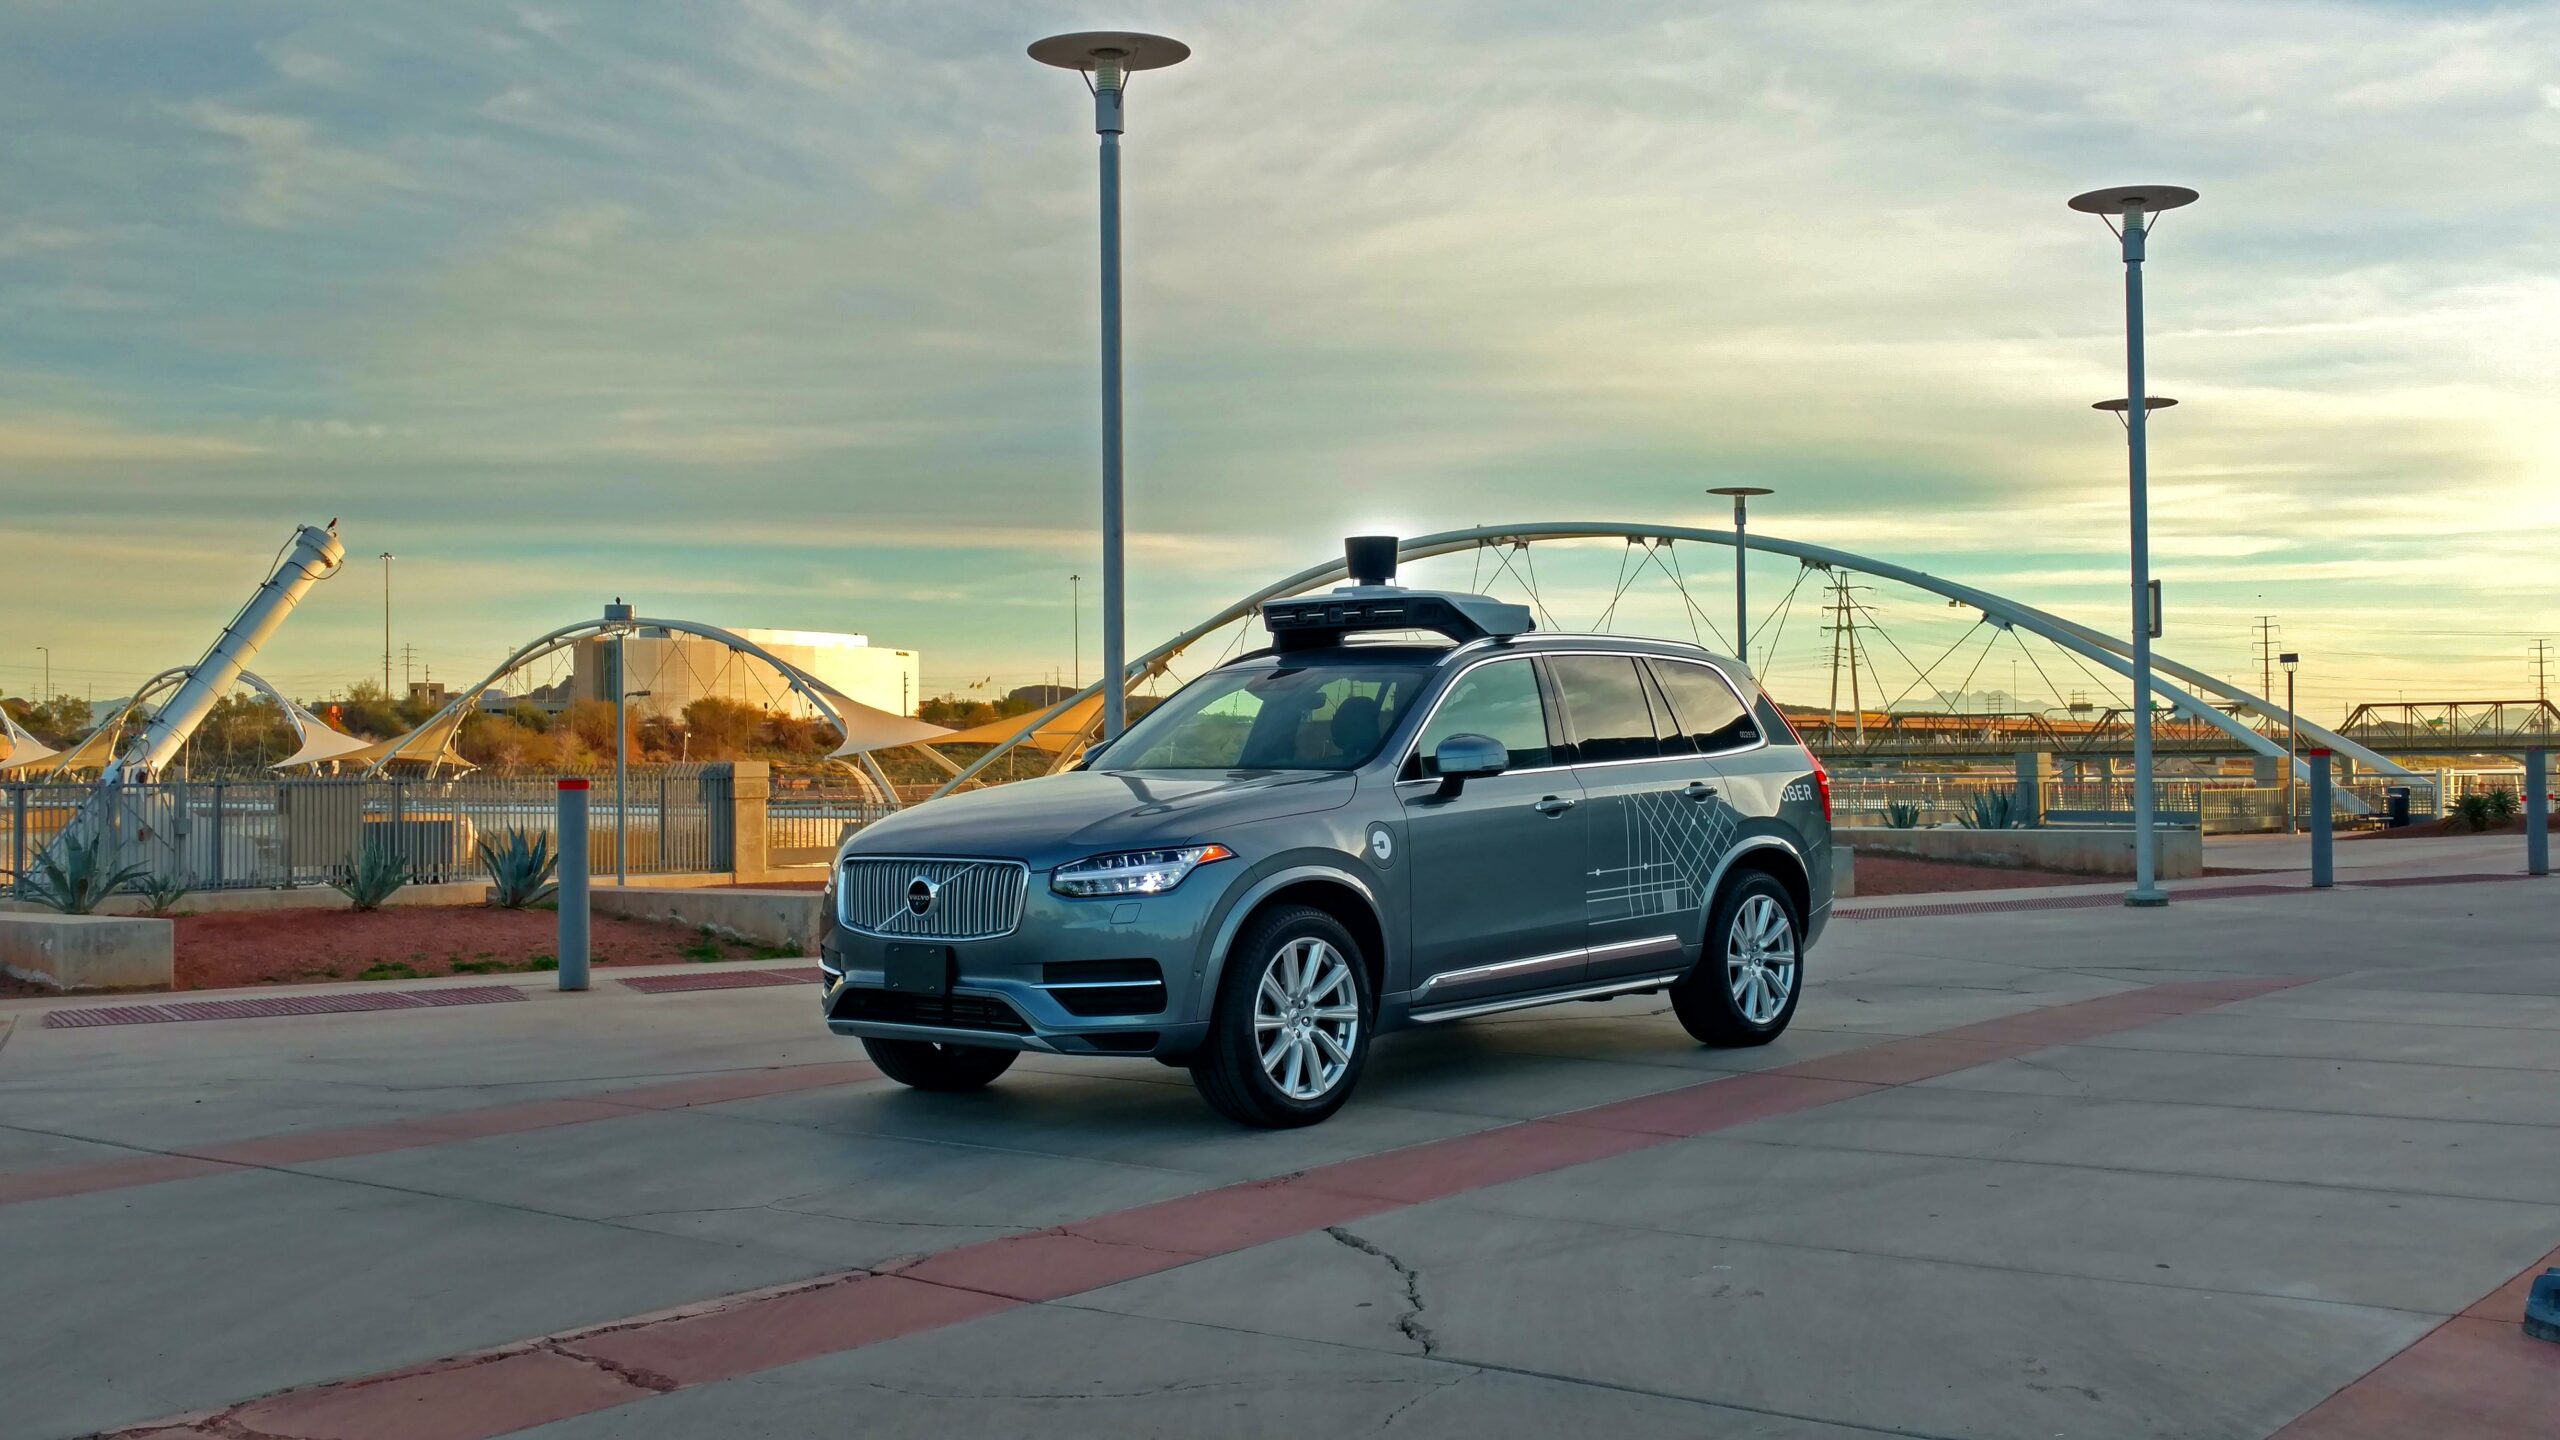 You probably won’t own a self-driving car, but you’ll ride in them a lot